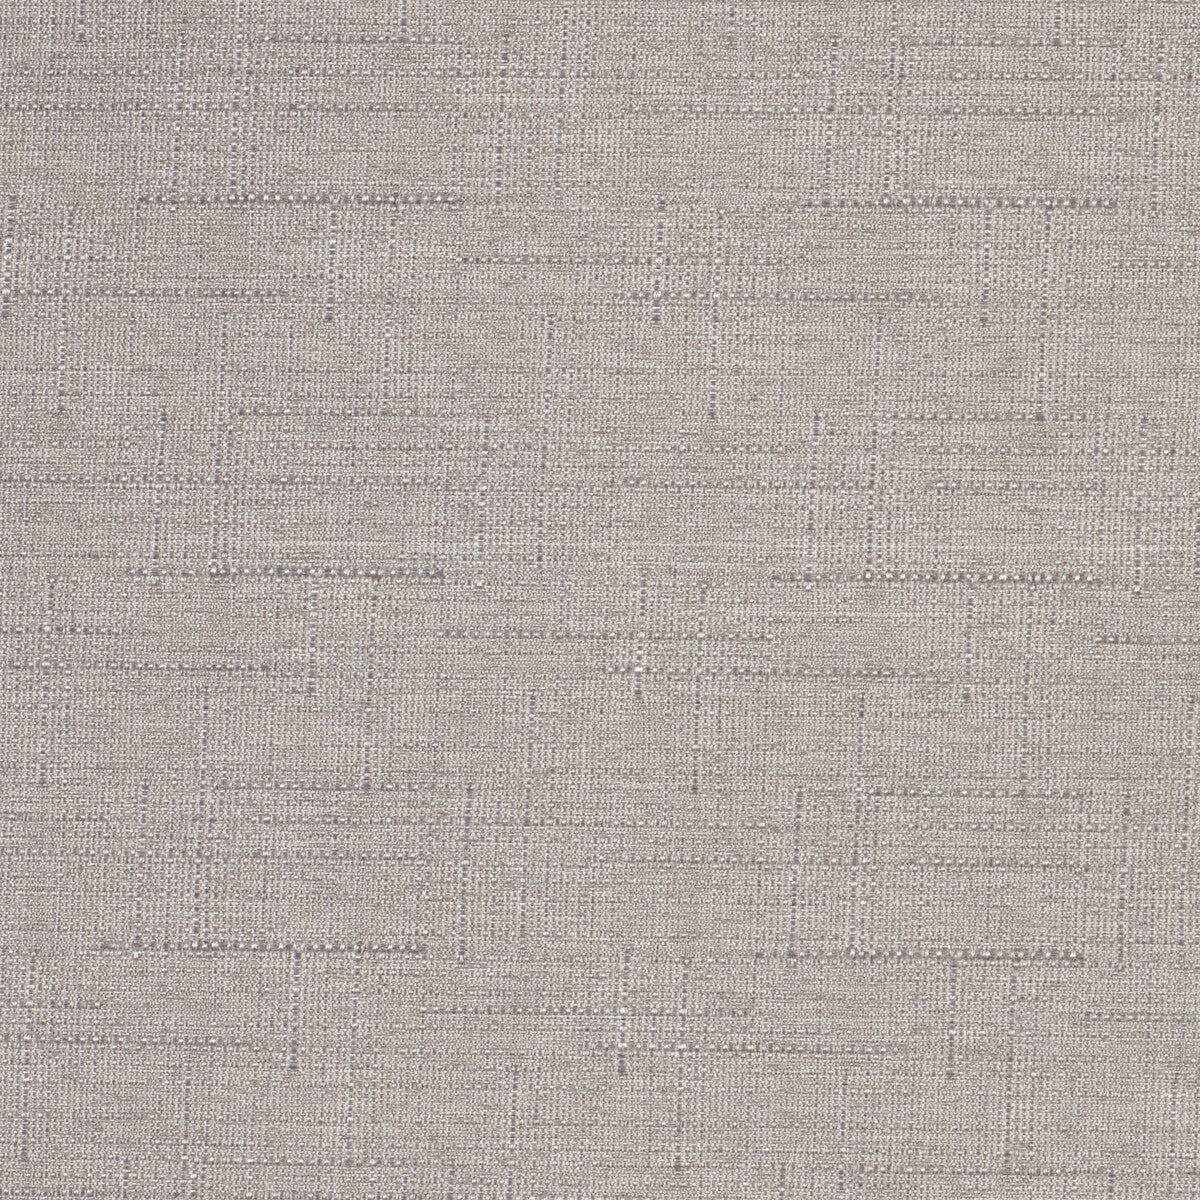 Kravet Contract fabric in 4317-110 color - pattern 4317.110.0 - by Kravet Contract